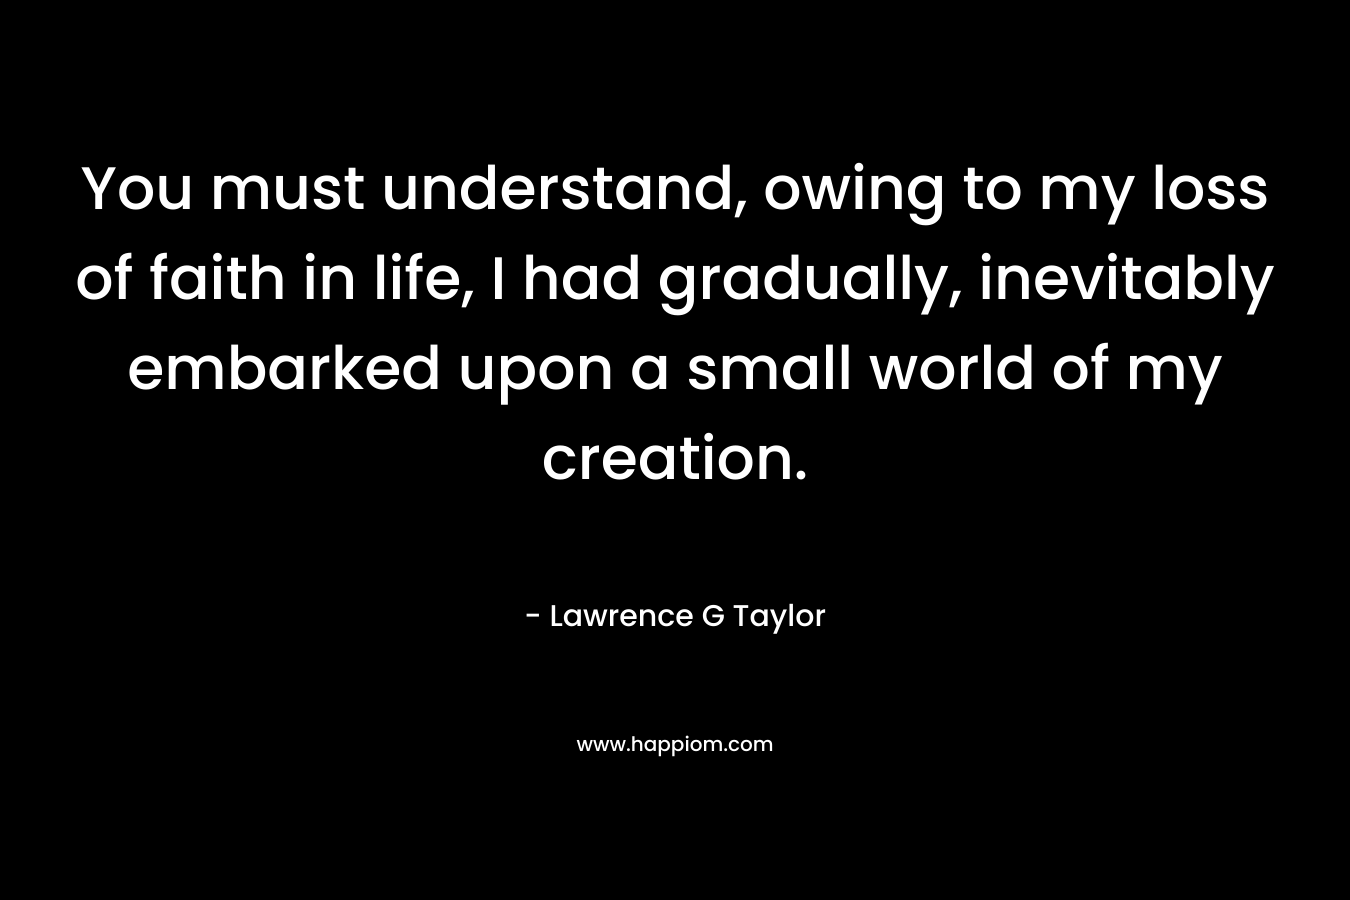 You must understand, owing to my loss of faith in life, I had gradually, inevitably embarked upon a small world of my creation. – Lawrence G Taylor